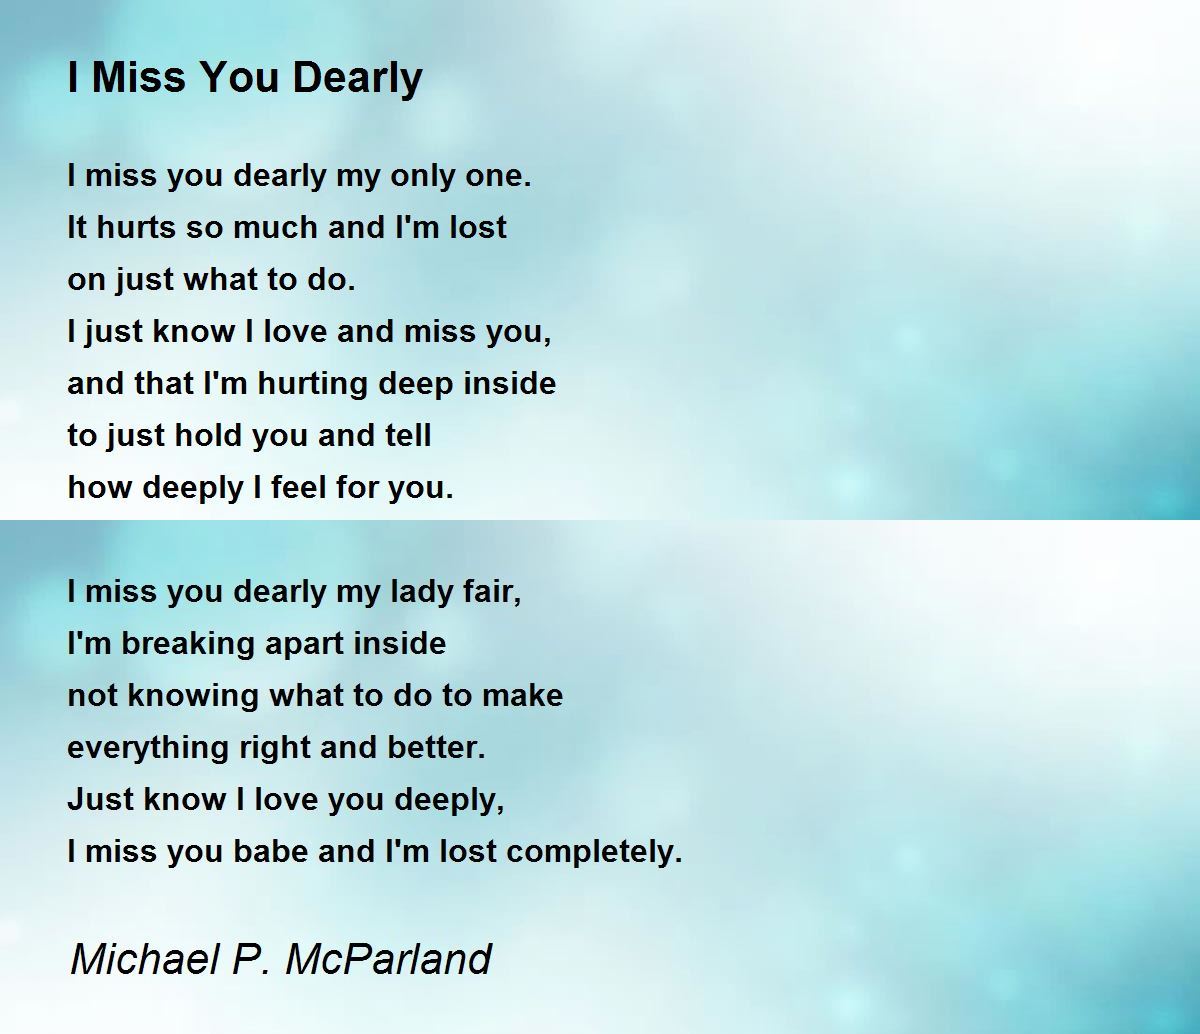 I miss you deeply